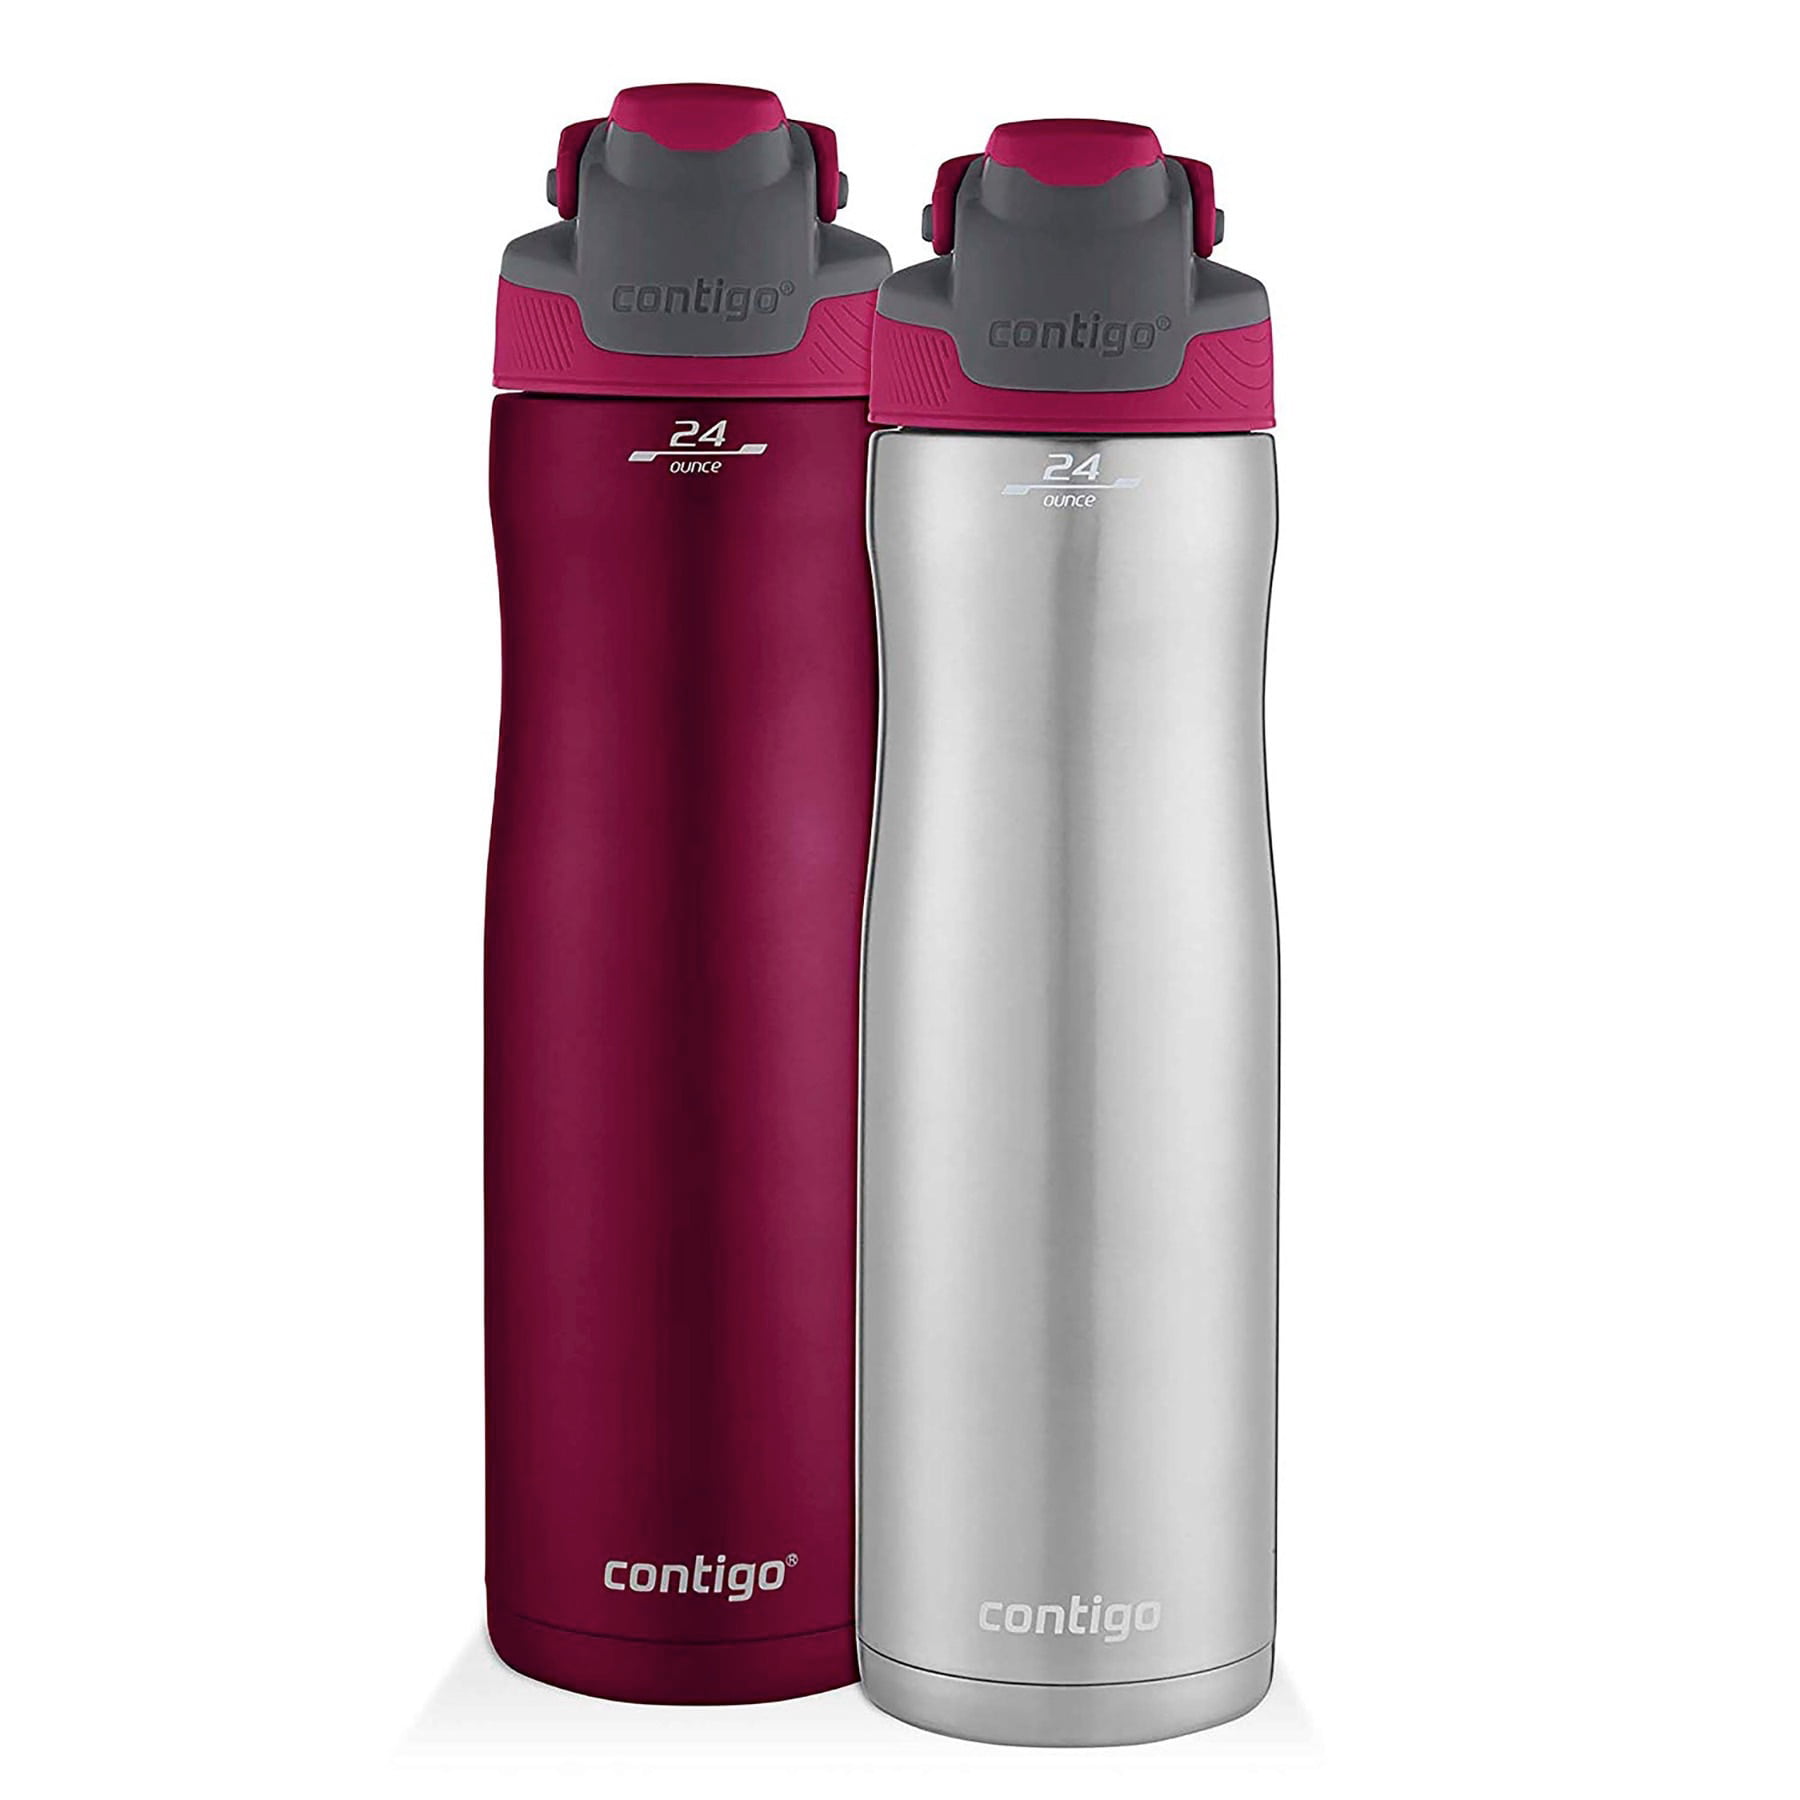 2-PACK Contigo Autoseal Chill Chard 24oz Insulated Stainless Steel Water Bottle 